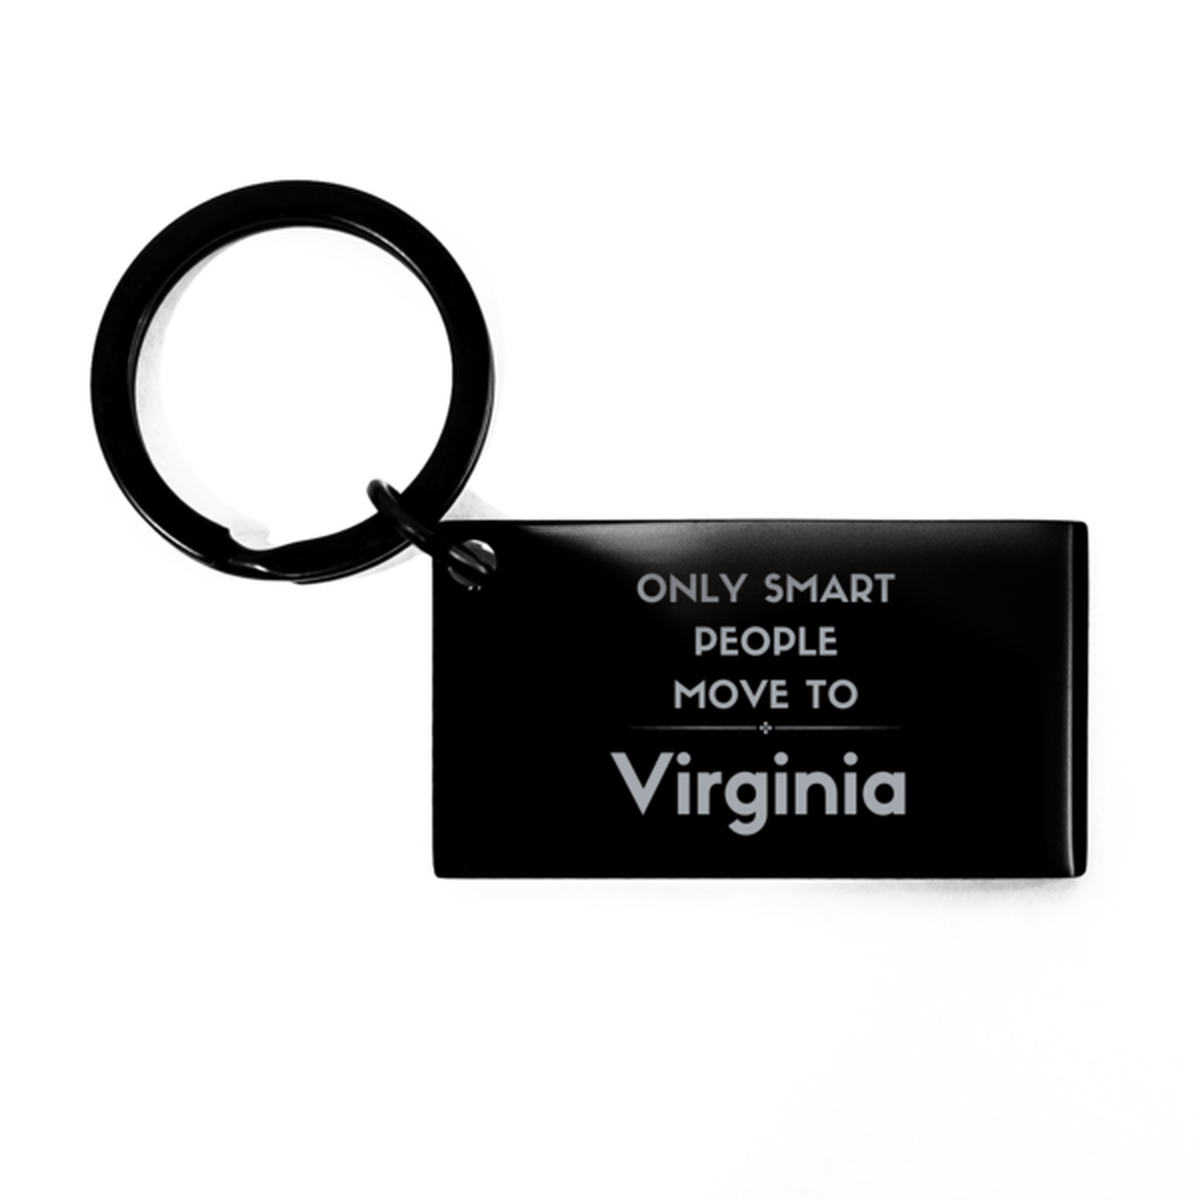 Only smart people move to Virginia Keychain, Gag Gifts For Virginia, Move to Virginia Gifts for Friends Coworker Funny Saying Quote